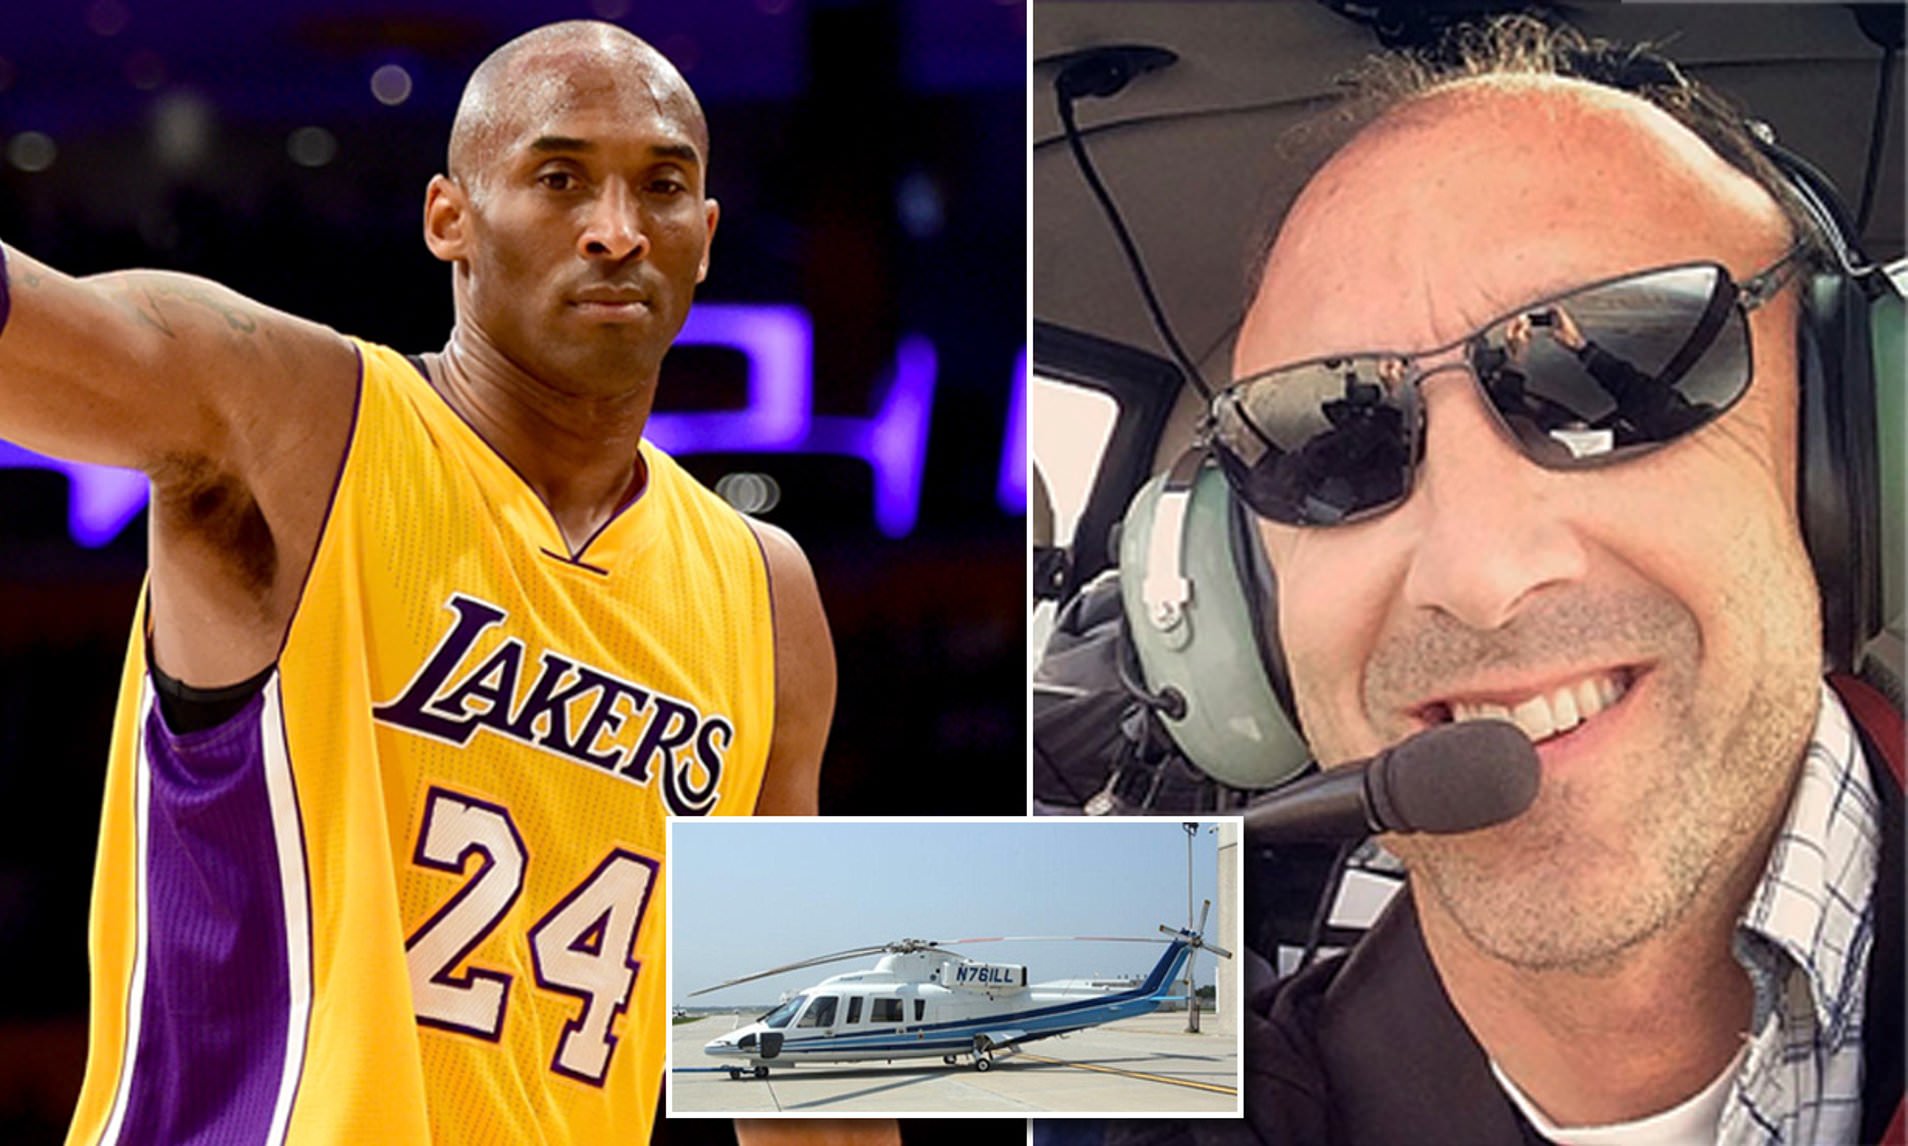 Kobe Bryant: Investigations reveal pilot was distracted during flight